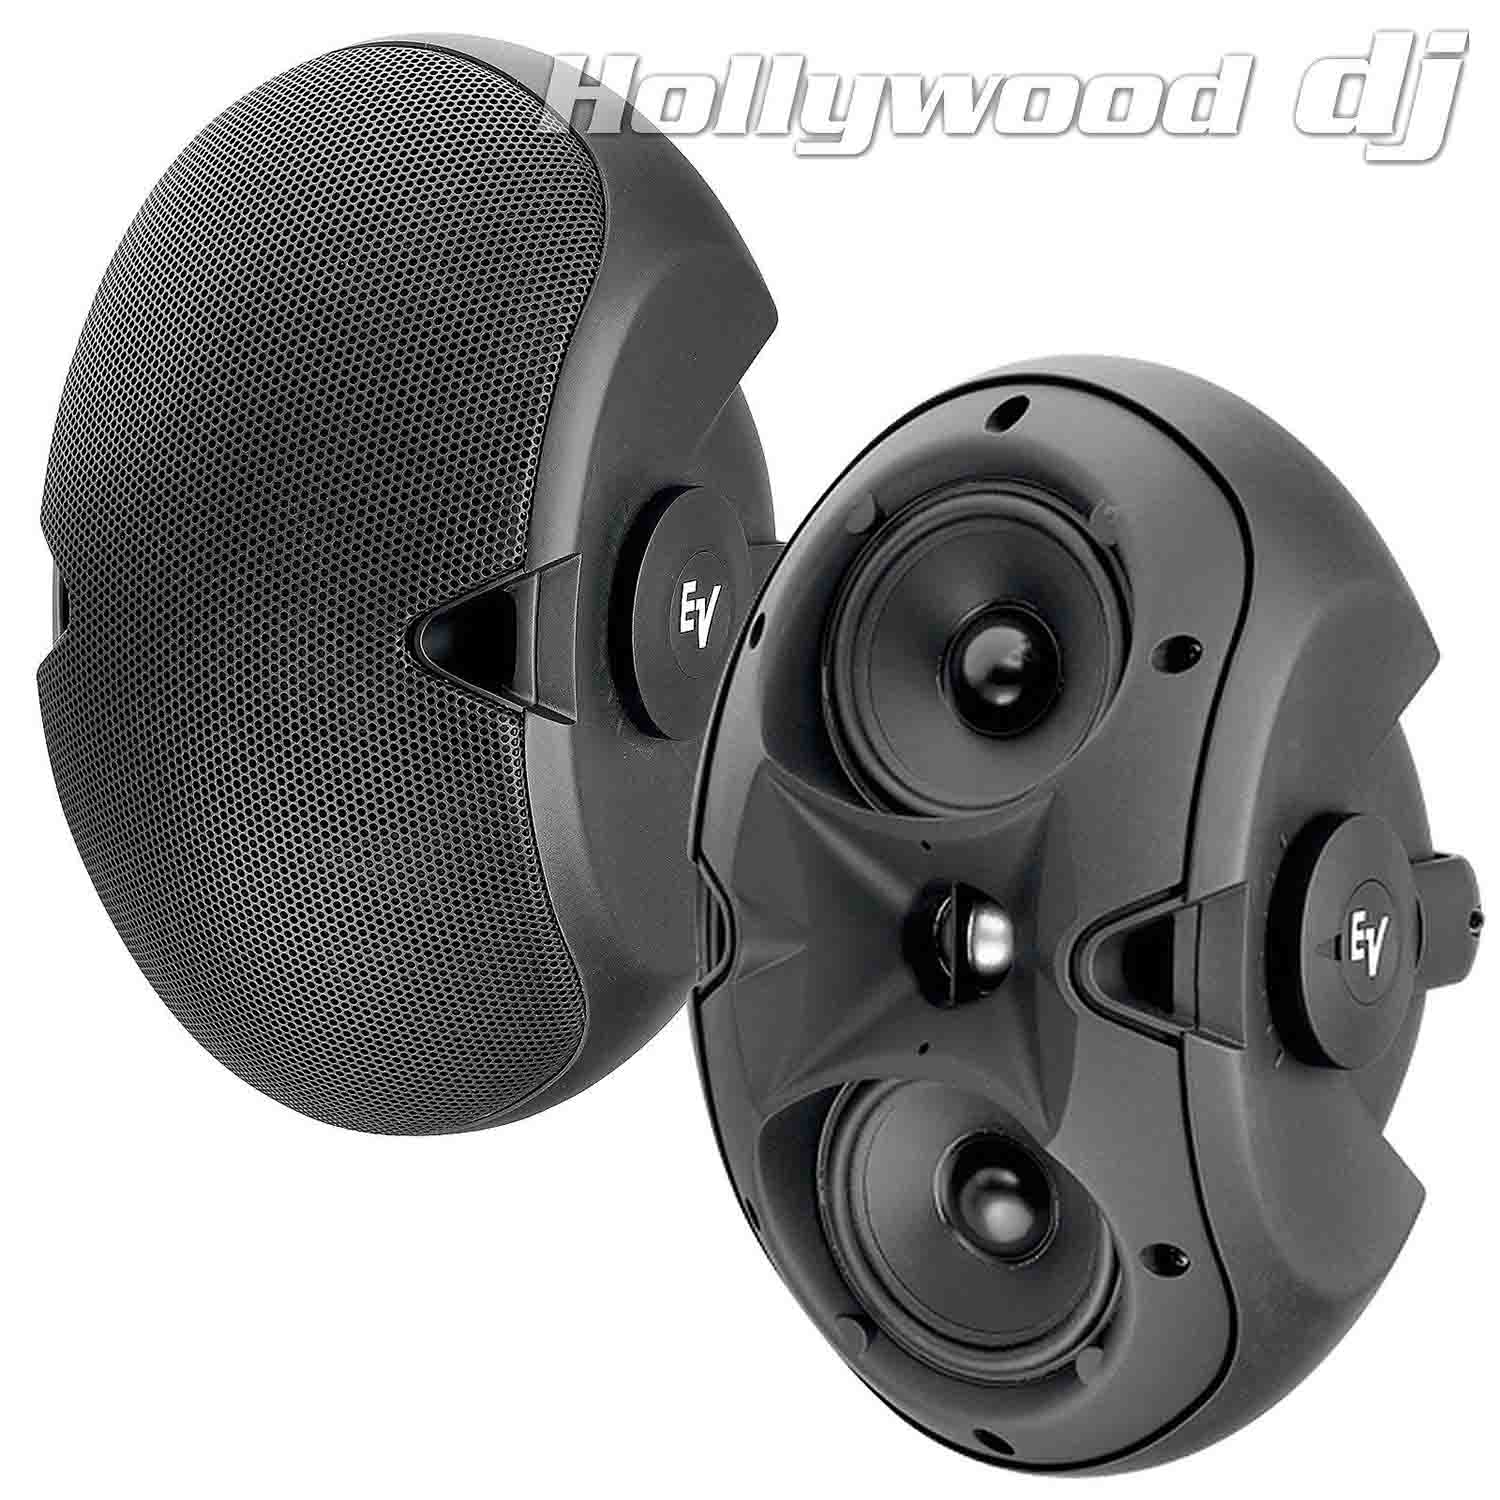 B-Stock: Electro-Voice EVID 3.2, Passive 2-Way 150W Installation Speaker with Dual 3.5" Woofers - Pair - Hollywood DJ